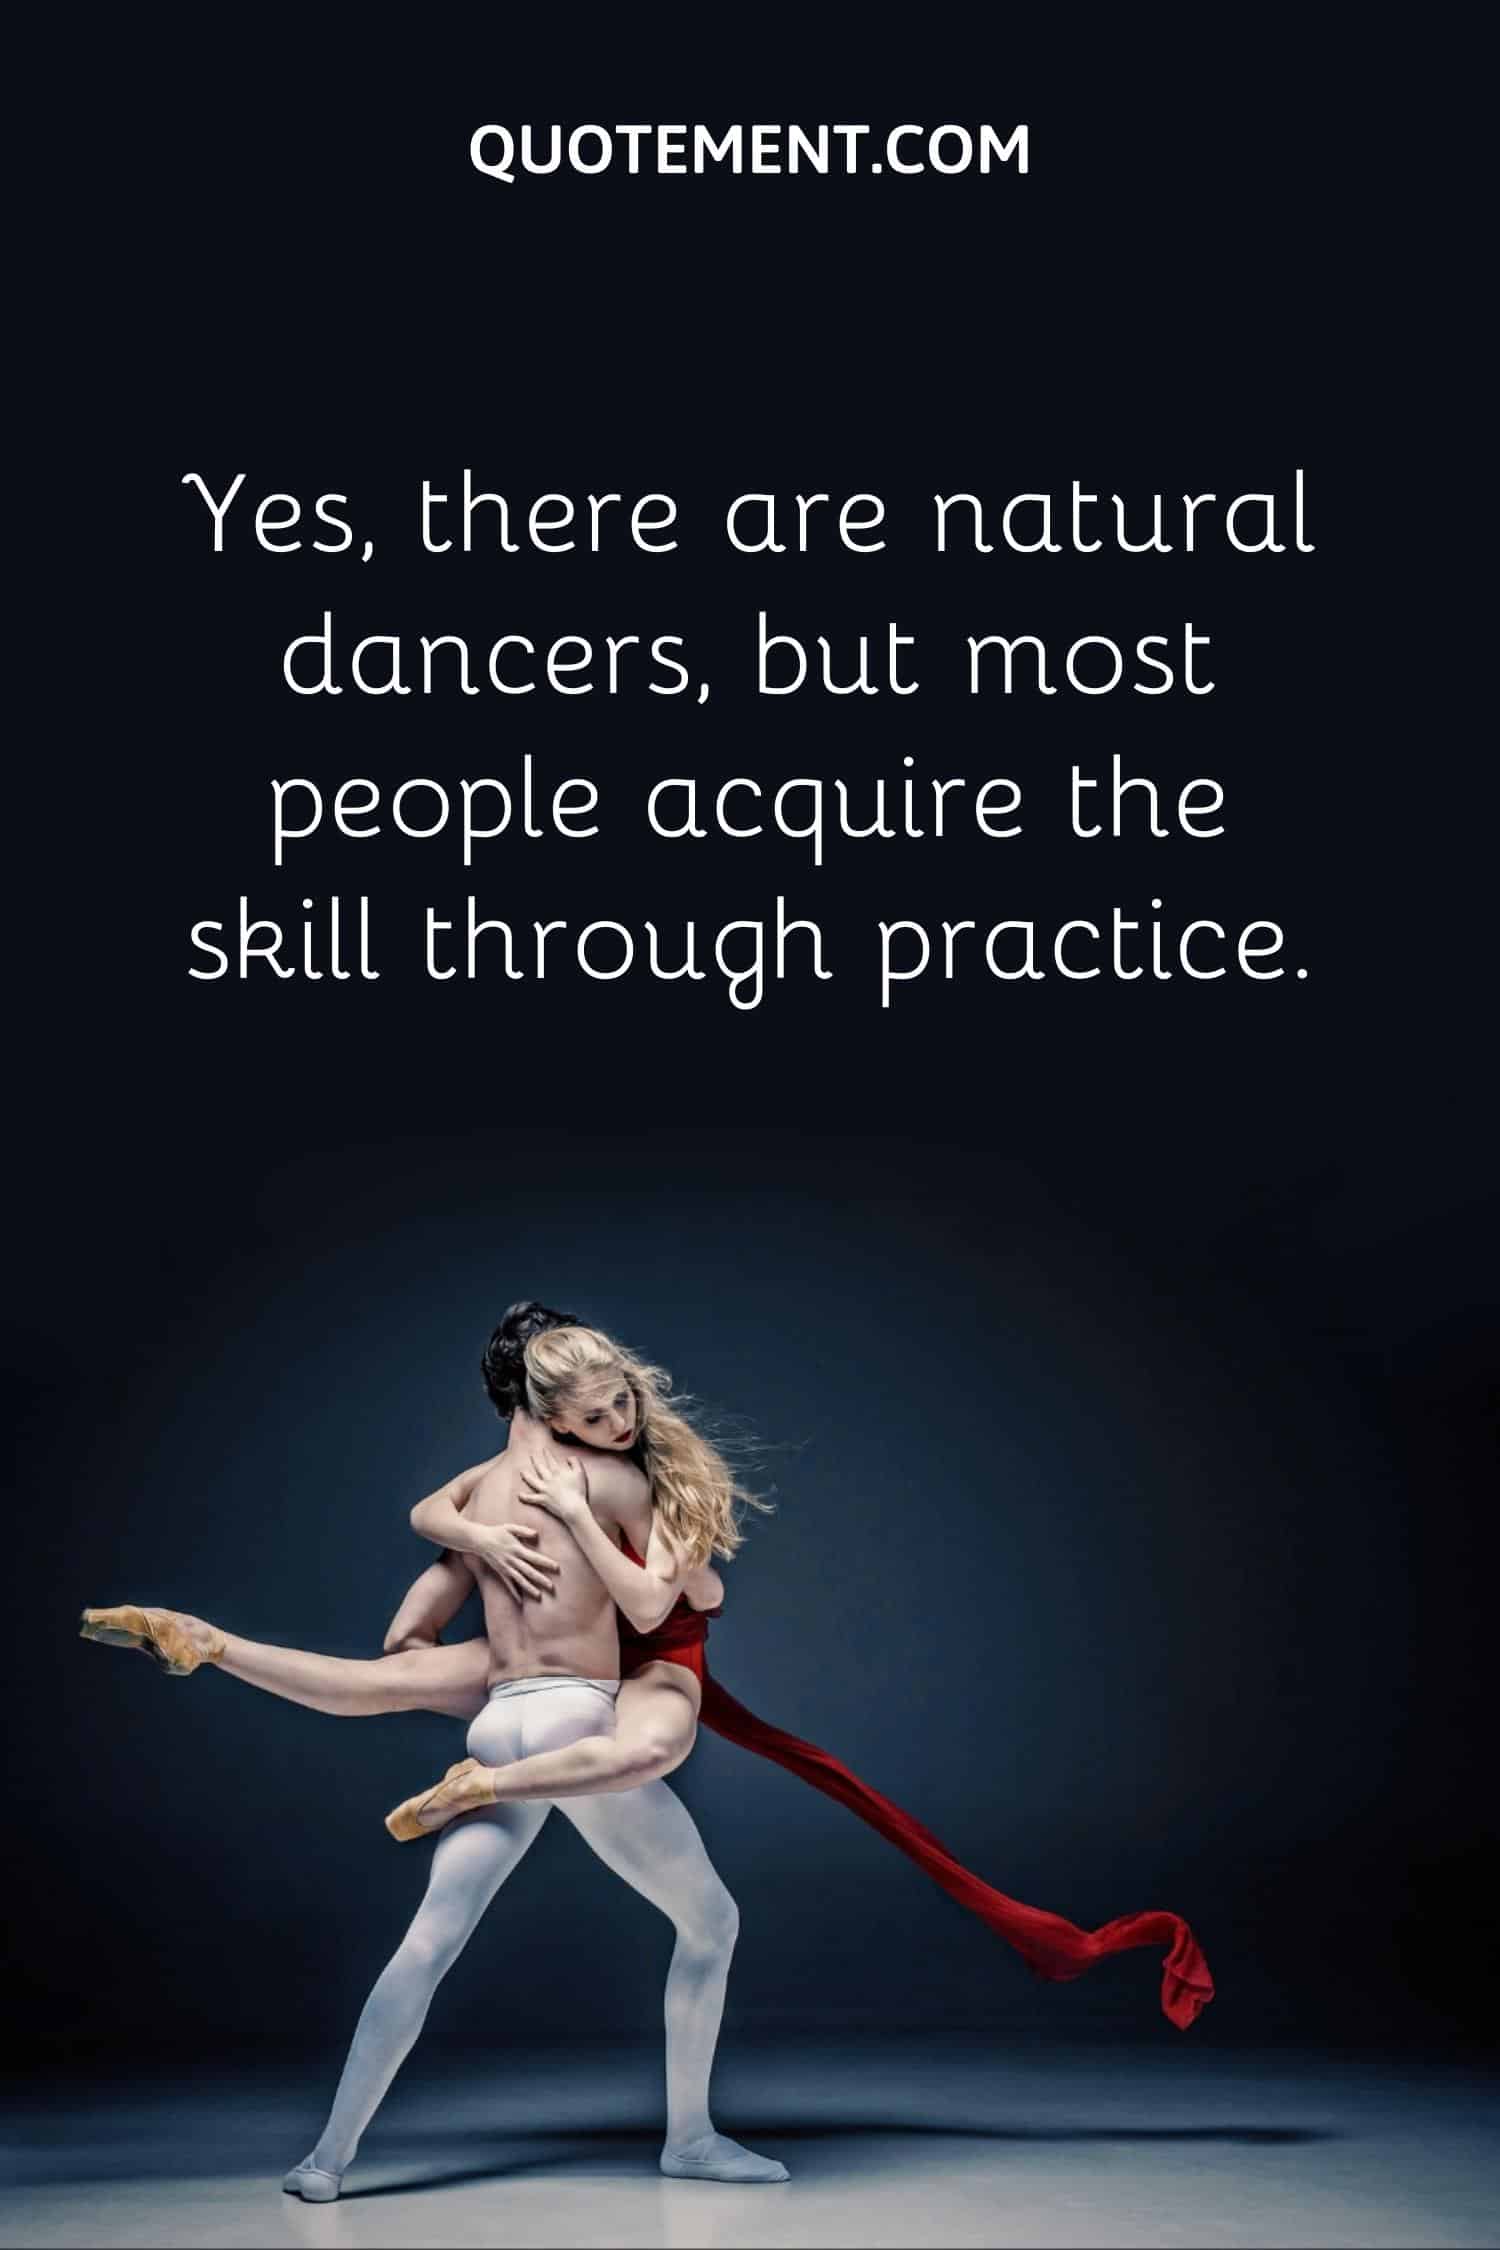 Yes, there are natural dancers, but most people acquire the skill through practice